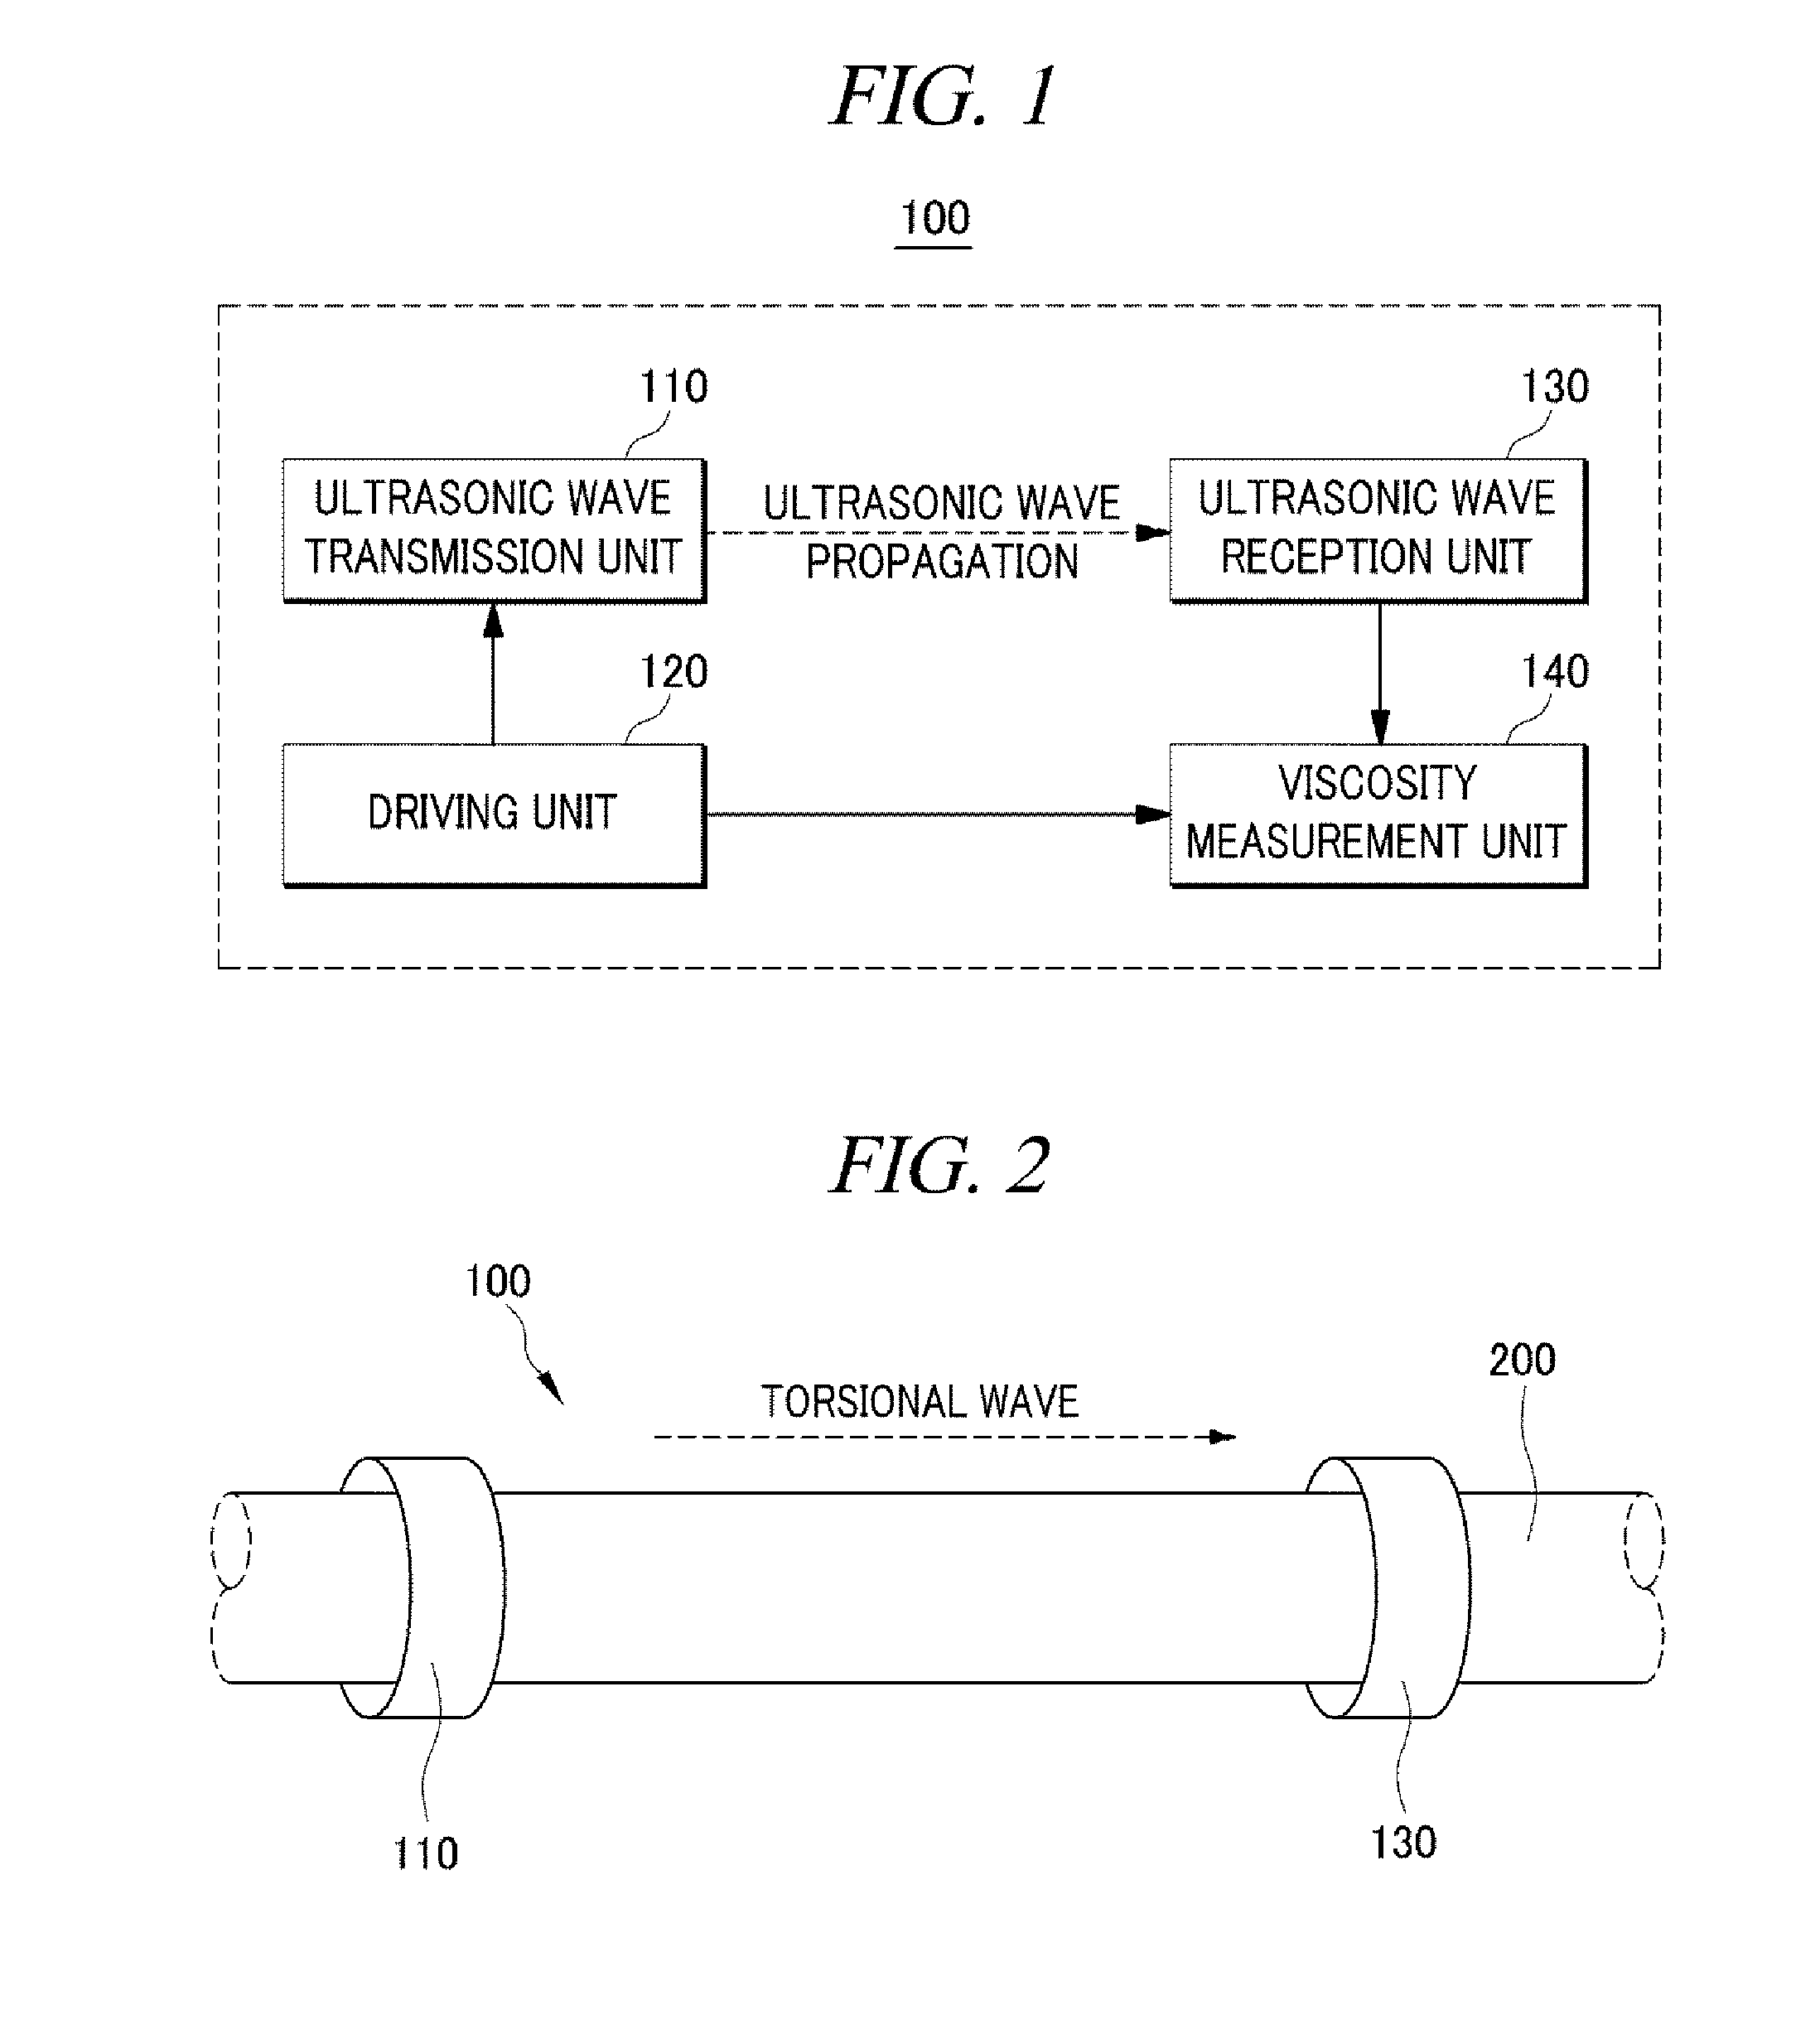 Apparatus and method for measuring the viscosity of a fluid using ultrasonic waves